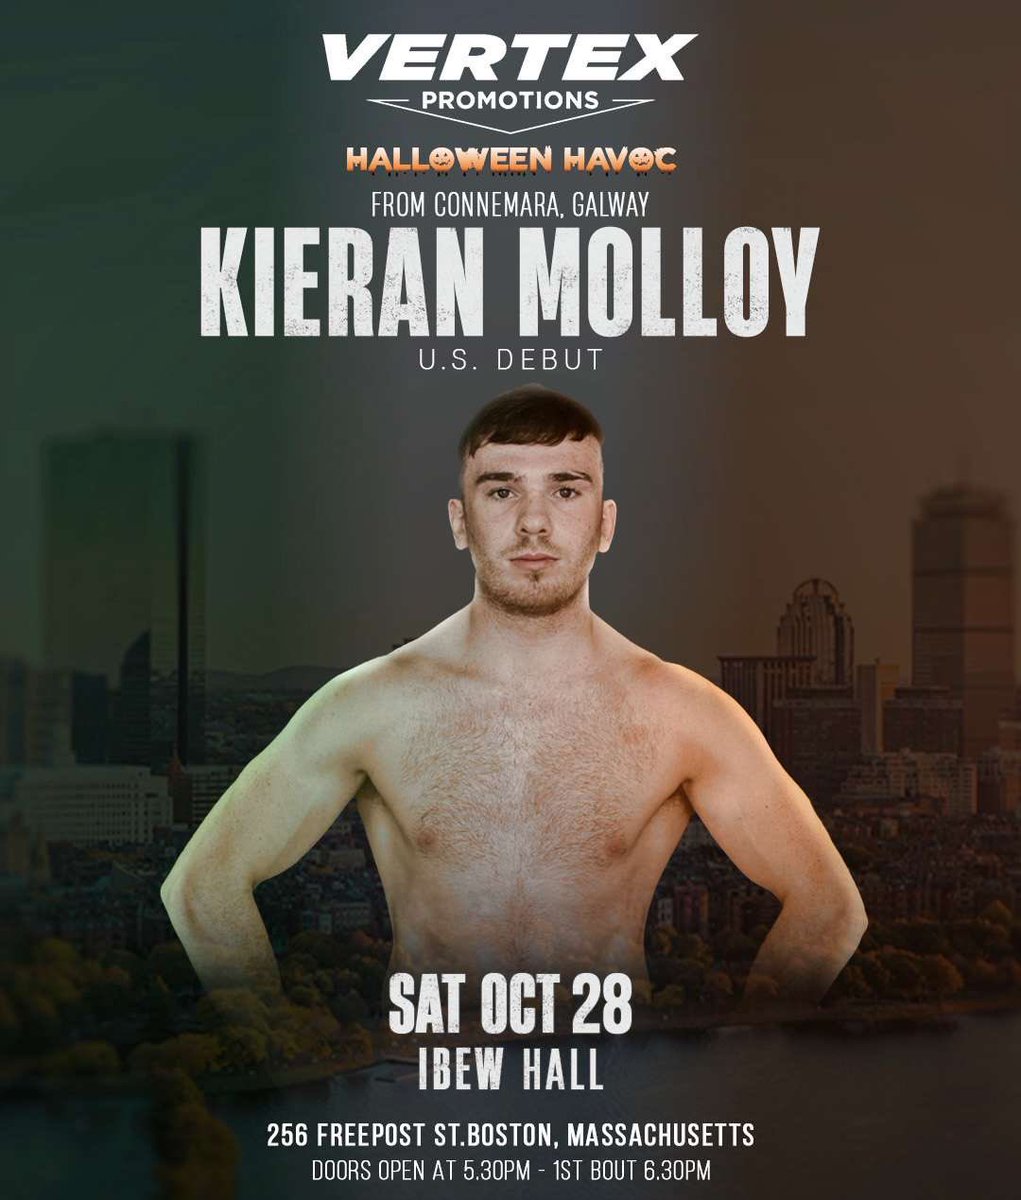 🇮🇪🇮🇪 Fight News 🇺🇸🇺🇸 October 28th we go across the pond for my US debut at the IBEW Hall in Boston, Massachusetts. Training camp is in full swing and looking forward to putting on a memorable performance for the Irish fans. Message for tickets 🎟️